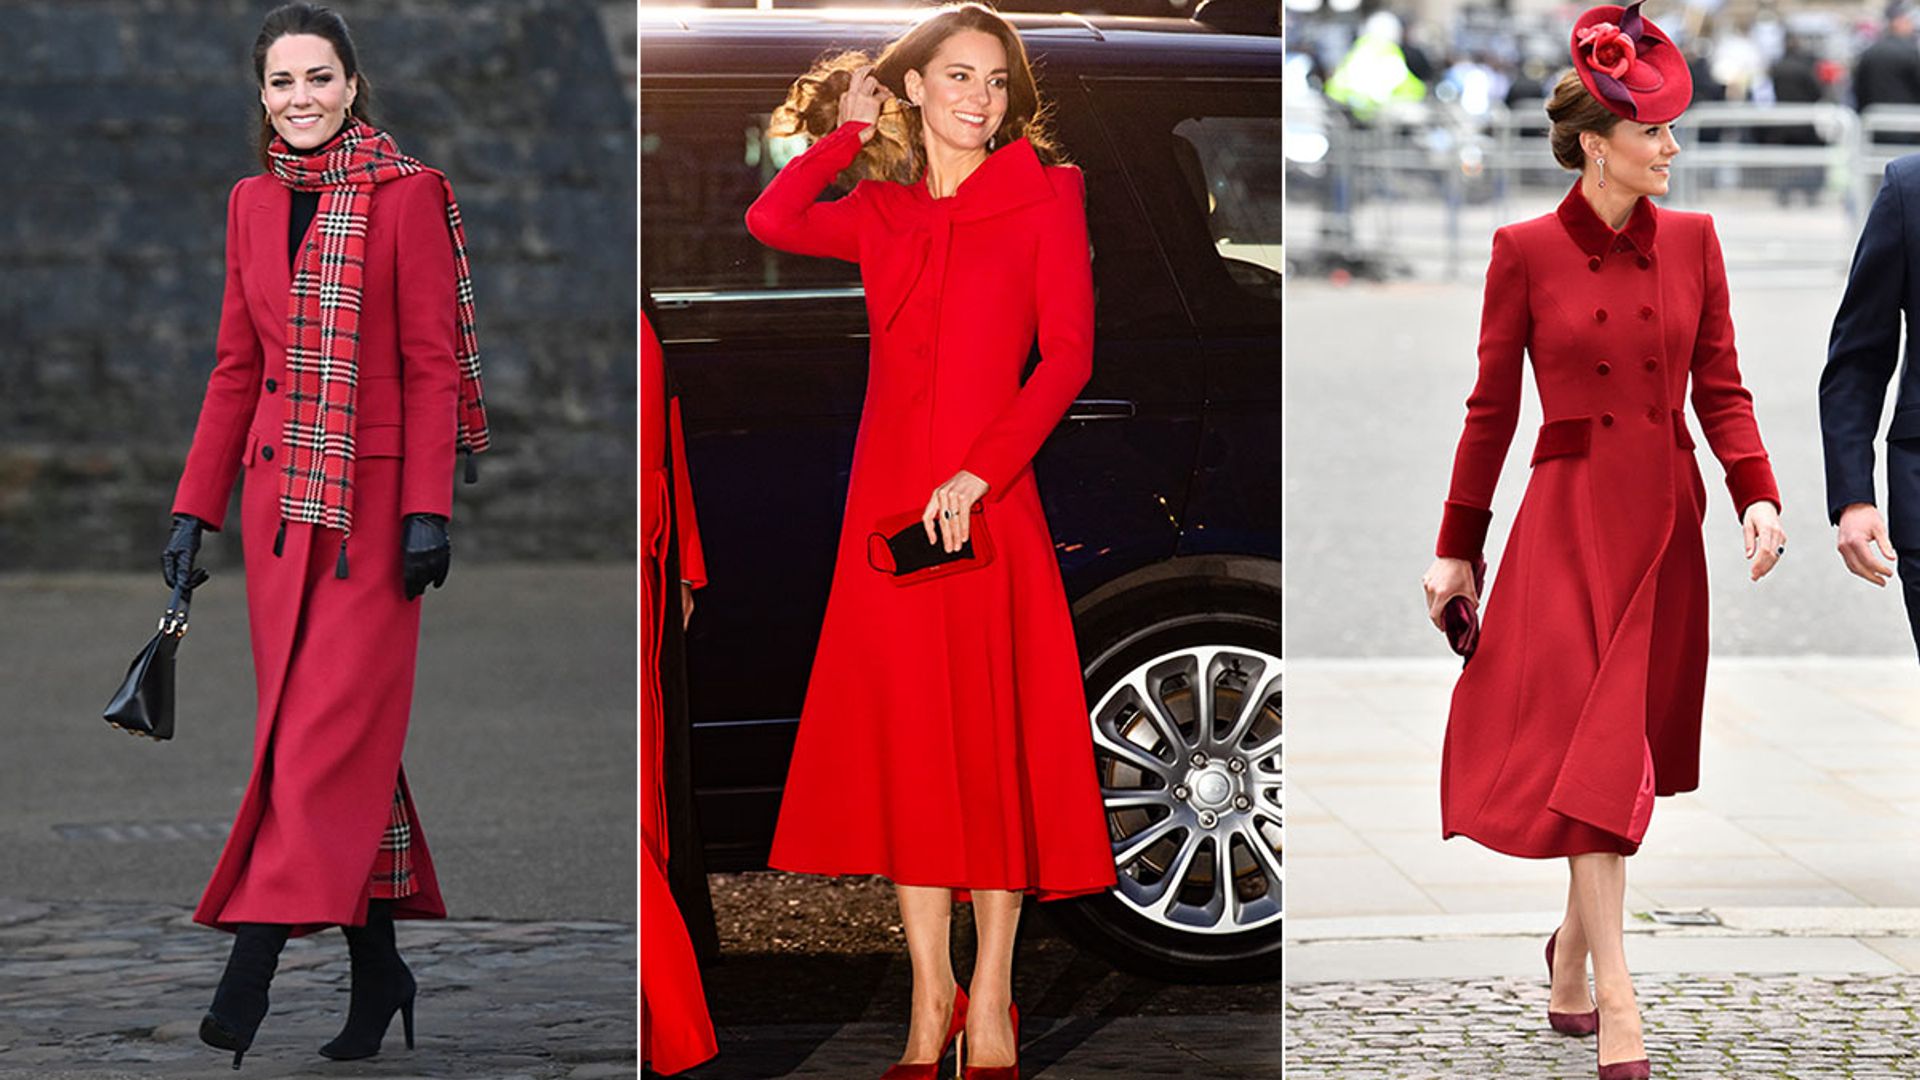 The Duchess in red: Kate Middleton's top 24 crimson looks